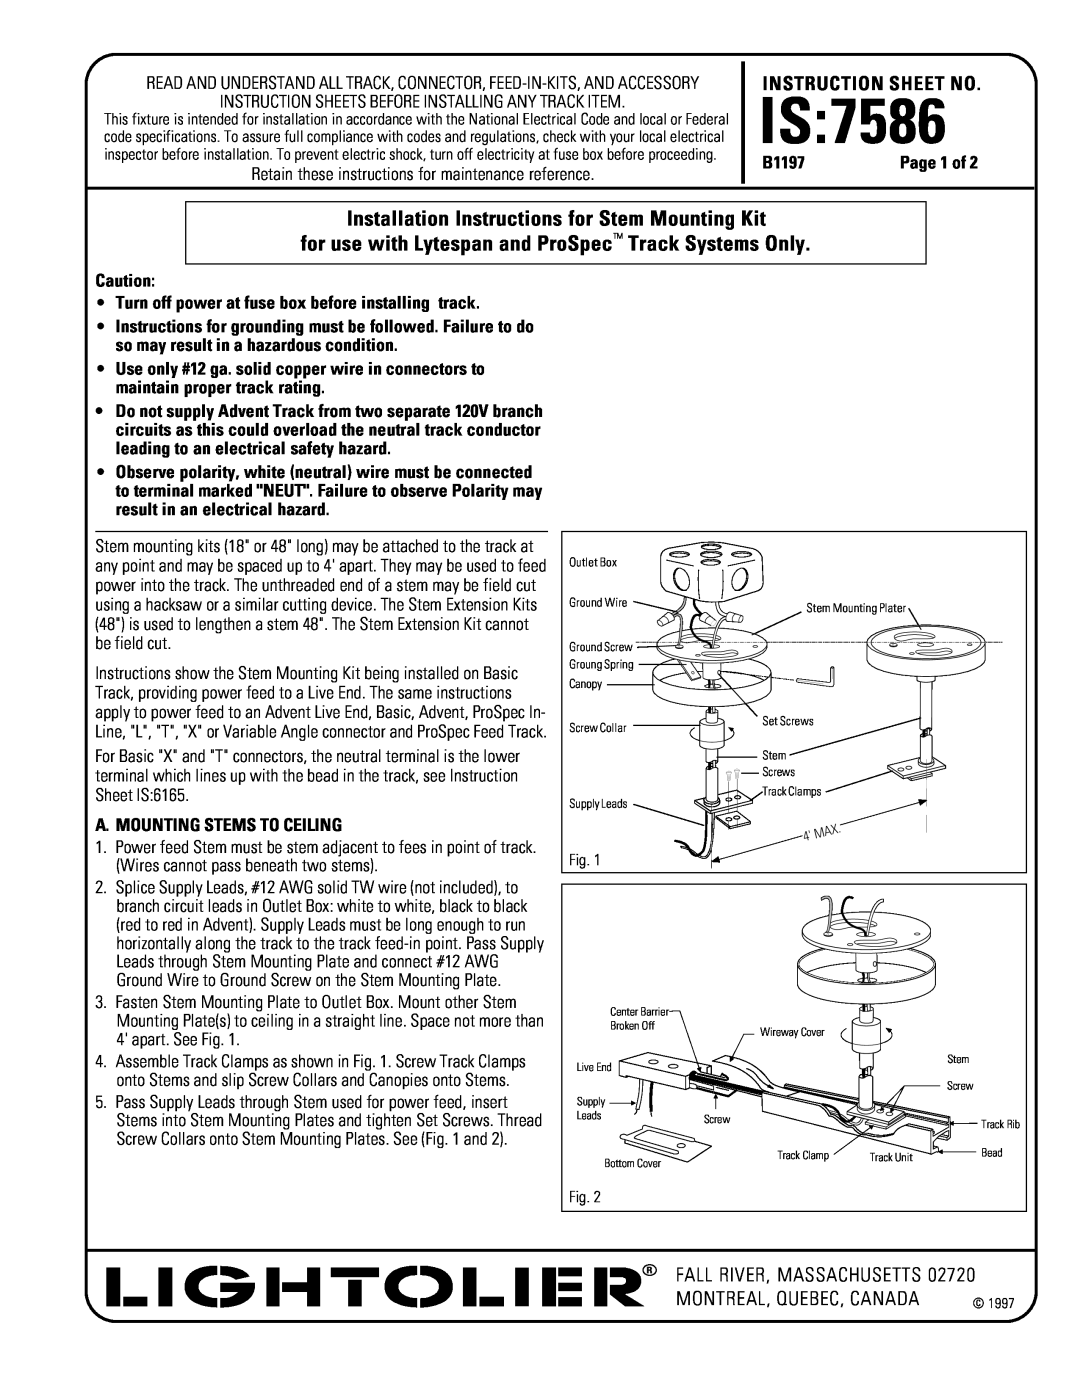 Lightolier IS:7586 instruction sheet Is, Installation Instructions for Stem Mounting Kit, Instruction Sheet No 